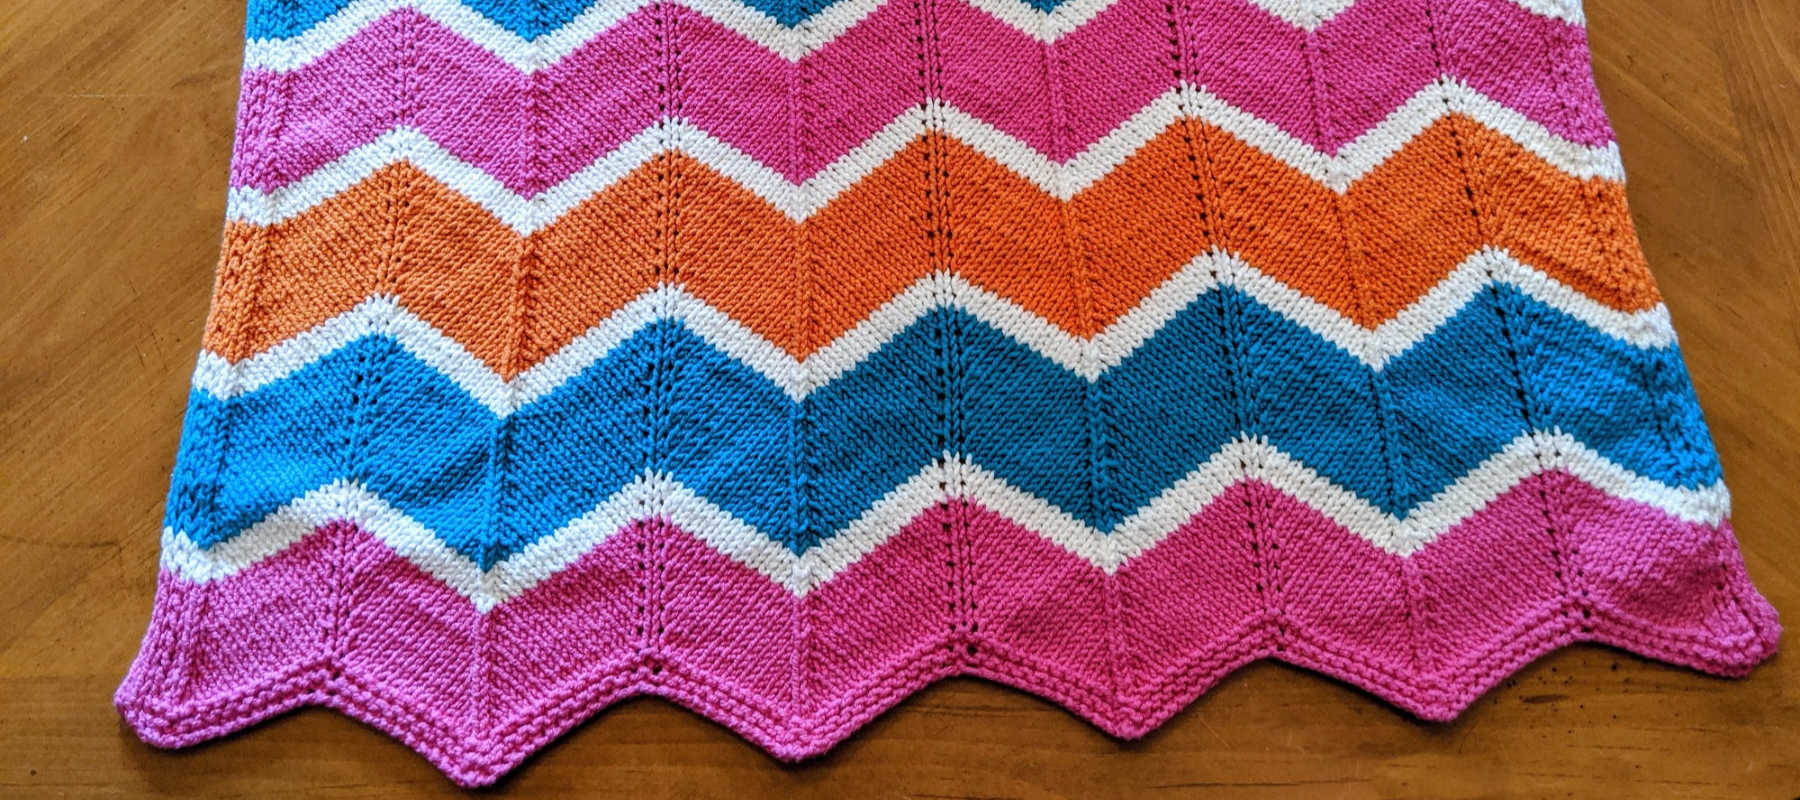 An Easy Knit Baby Blanket: The Chevron Blanket